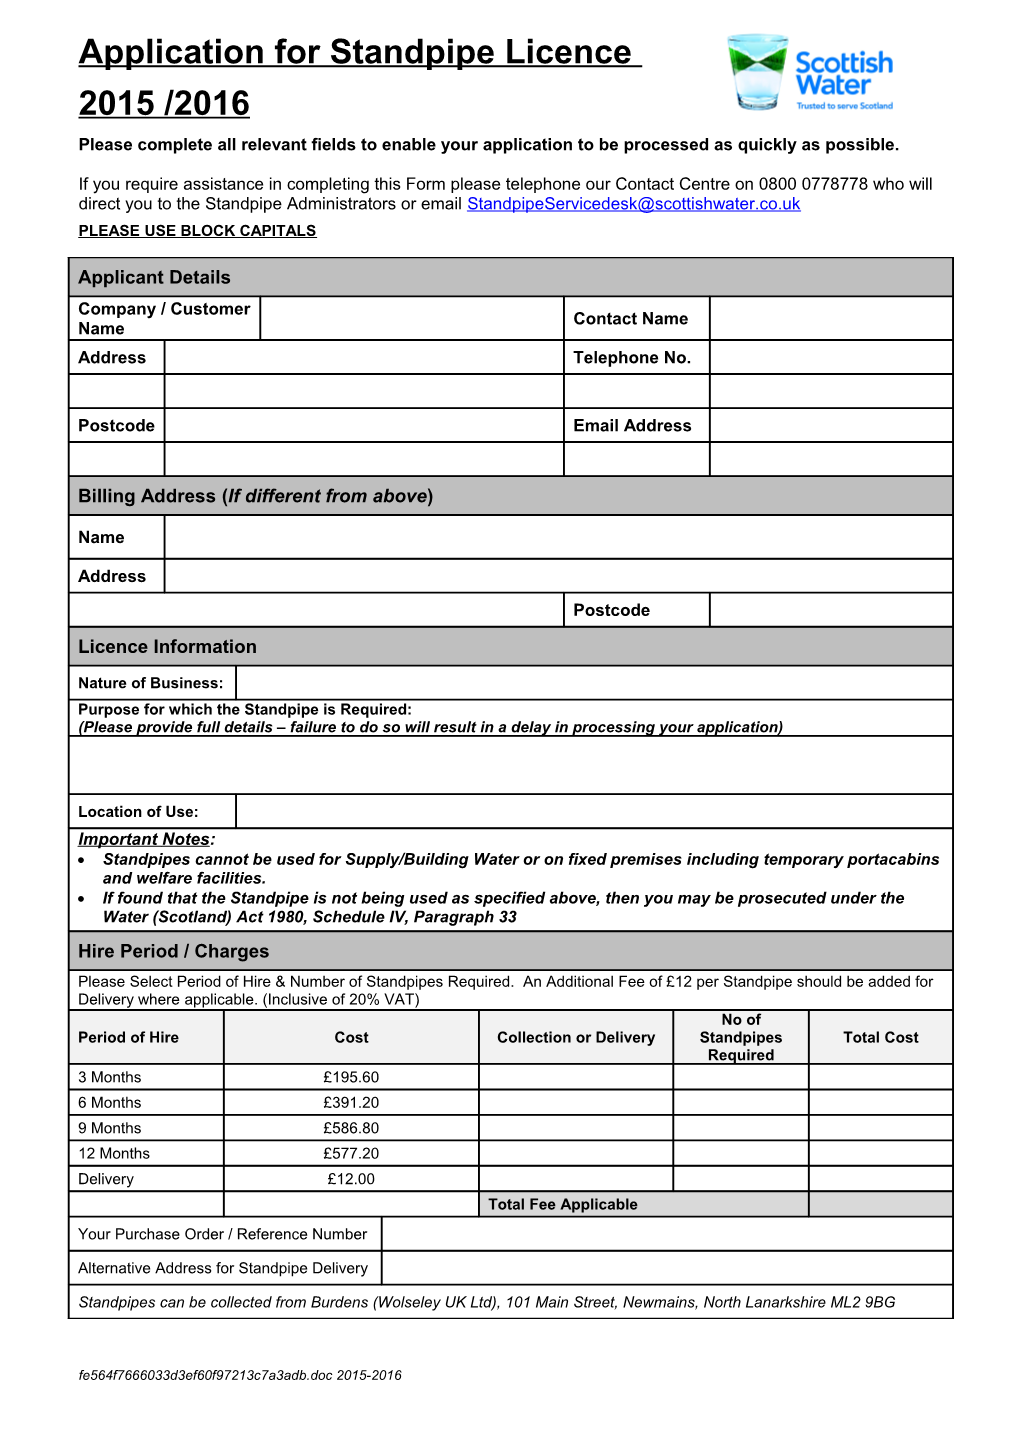 Application for a Standpipe Licence